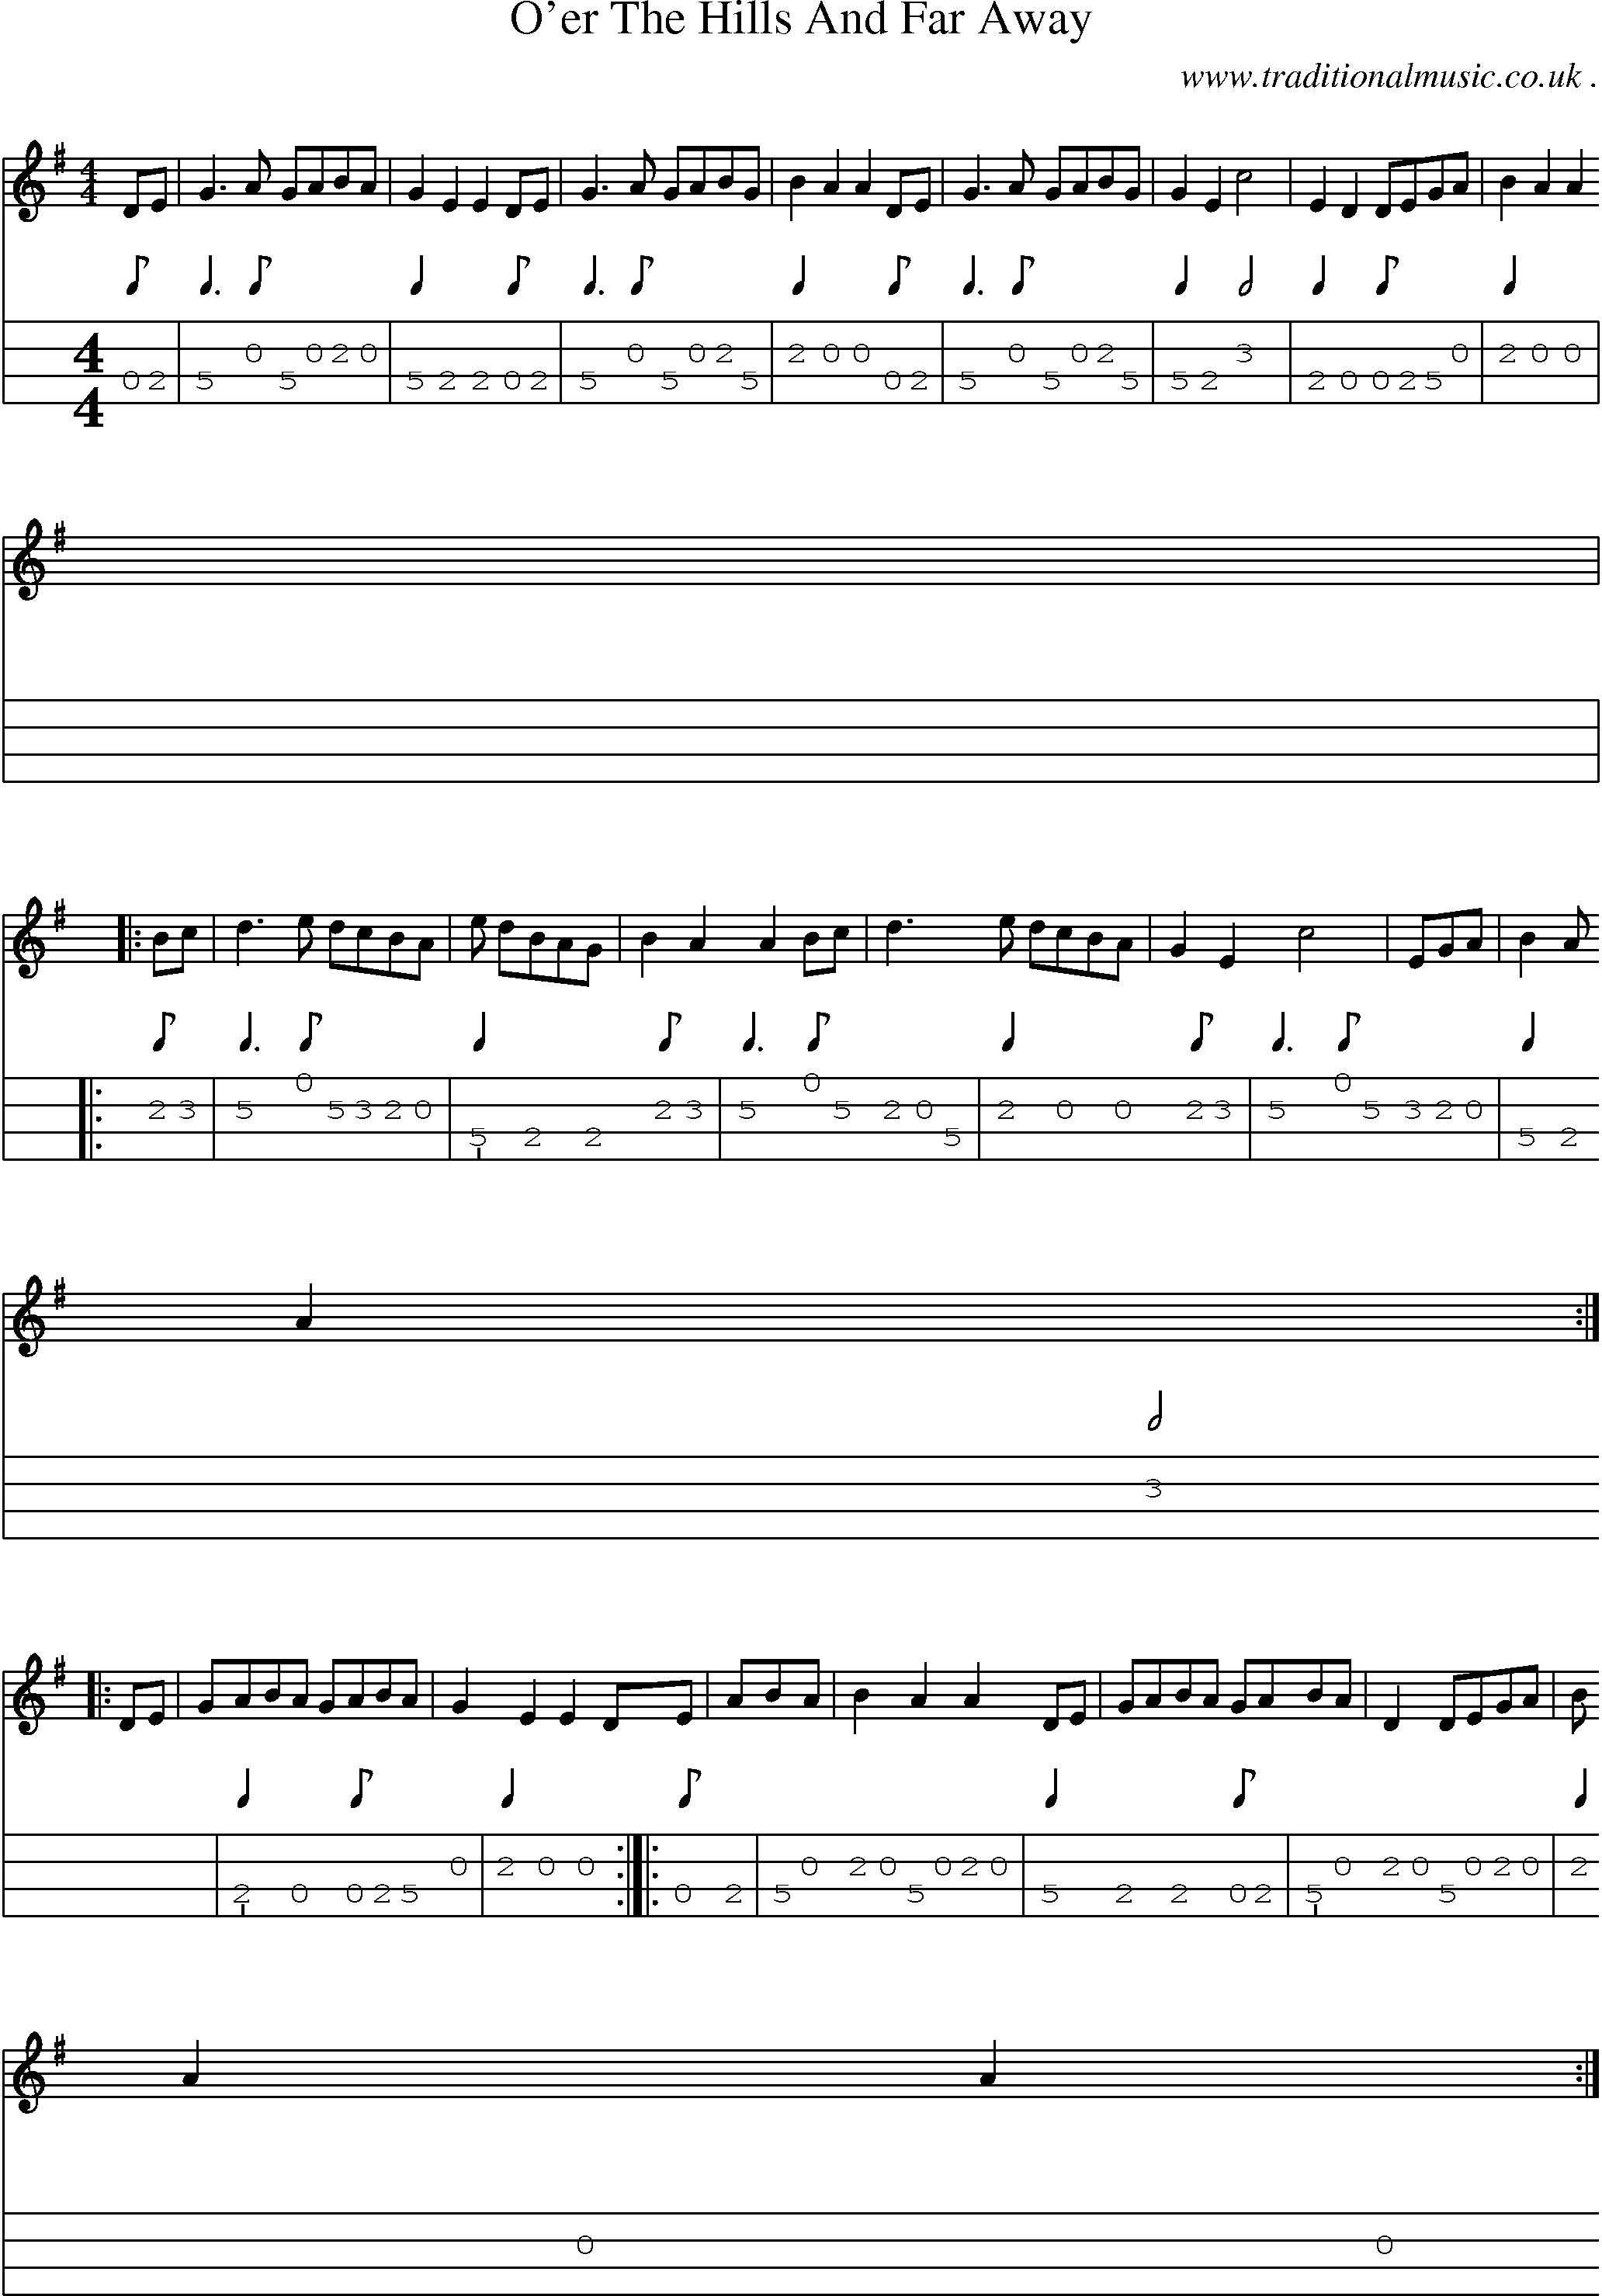 Sheet-Music and Mandolin Tabs for Oer The Hills And Far Away